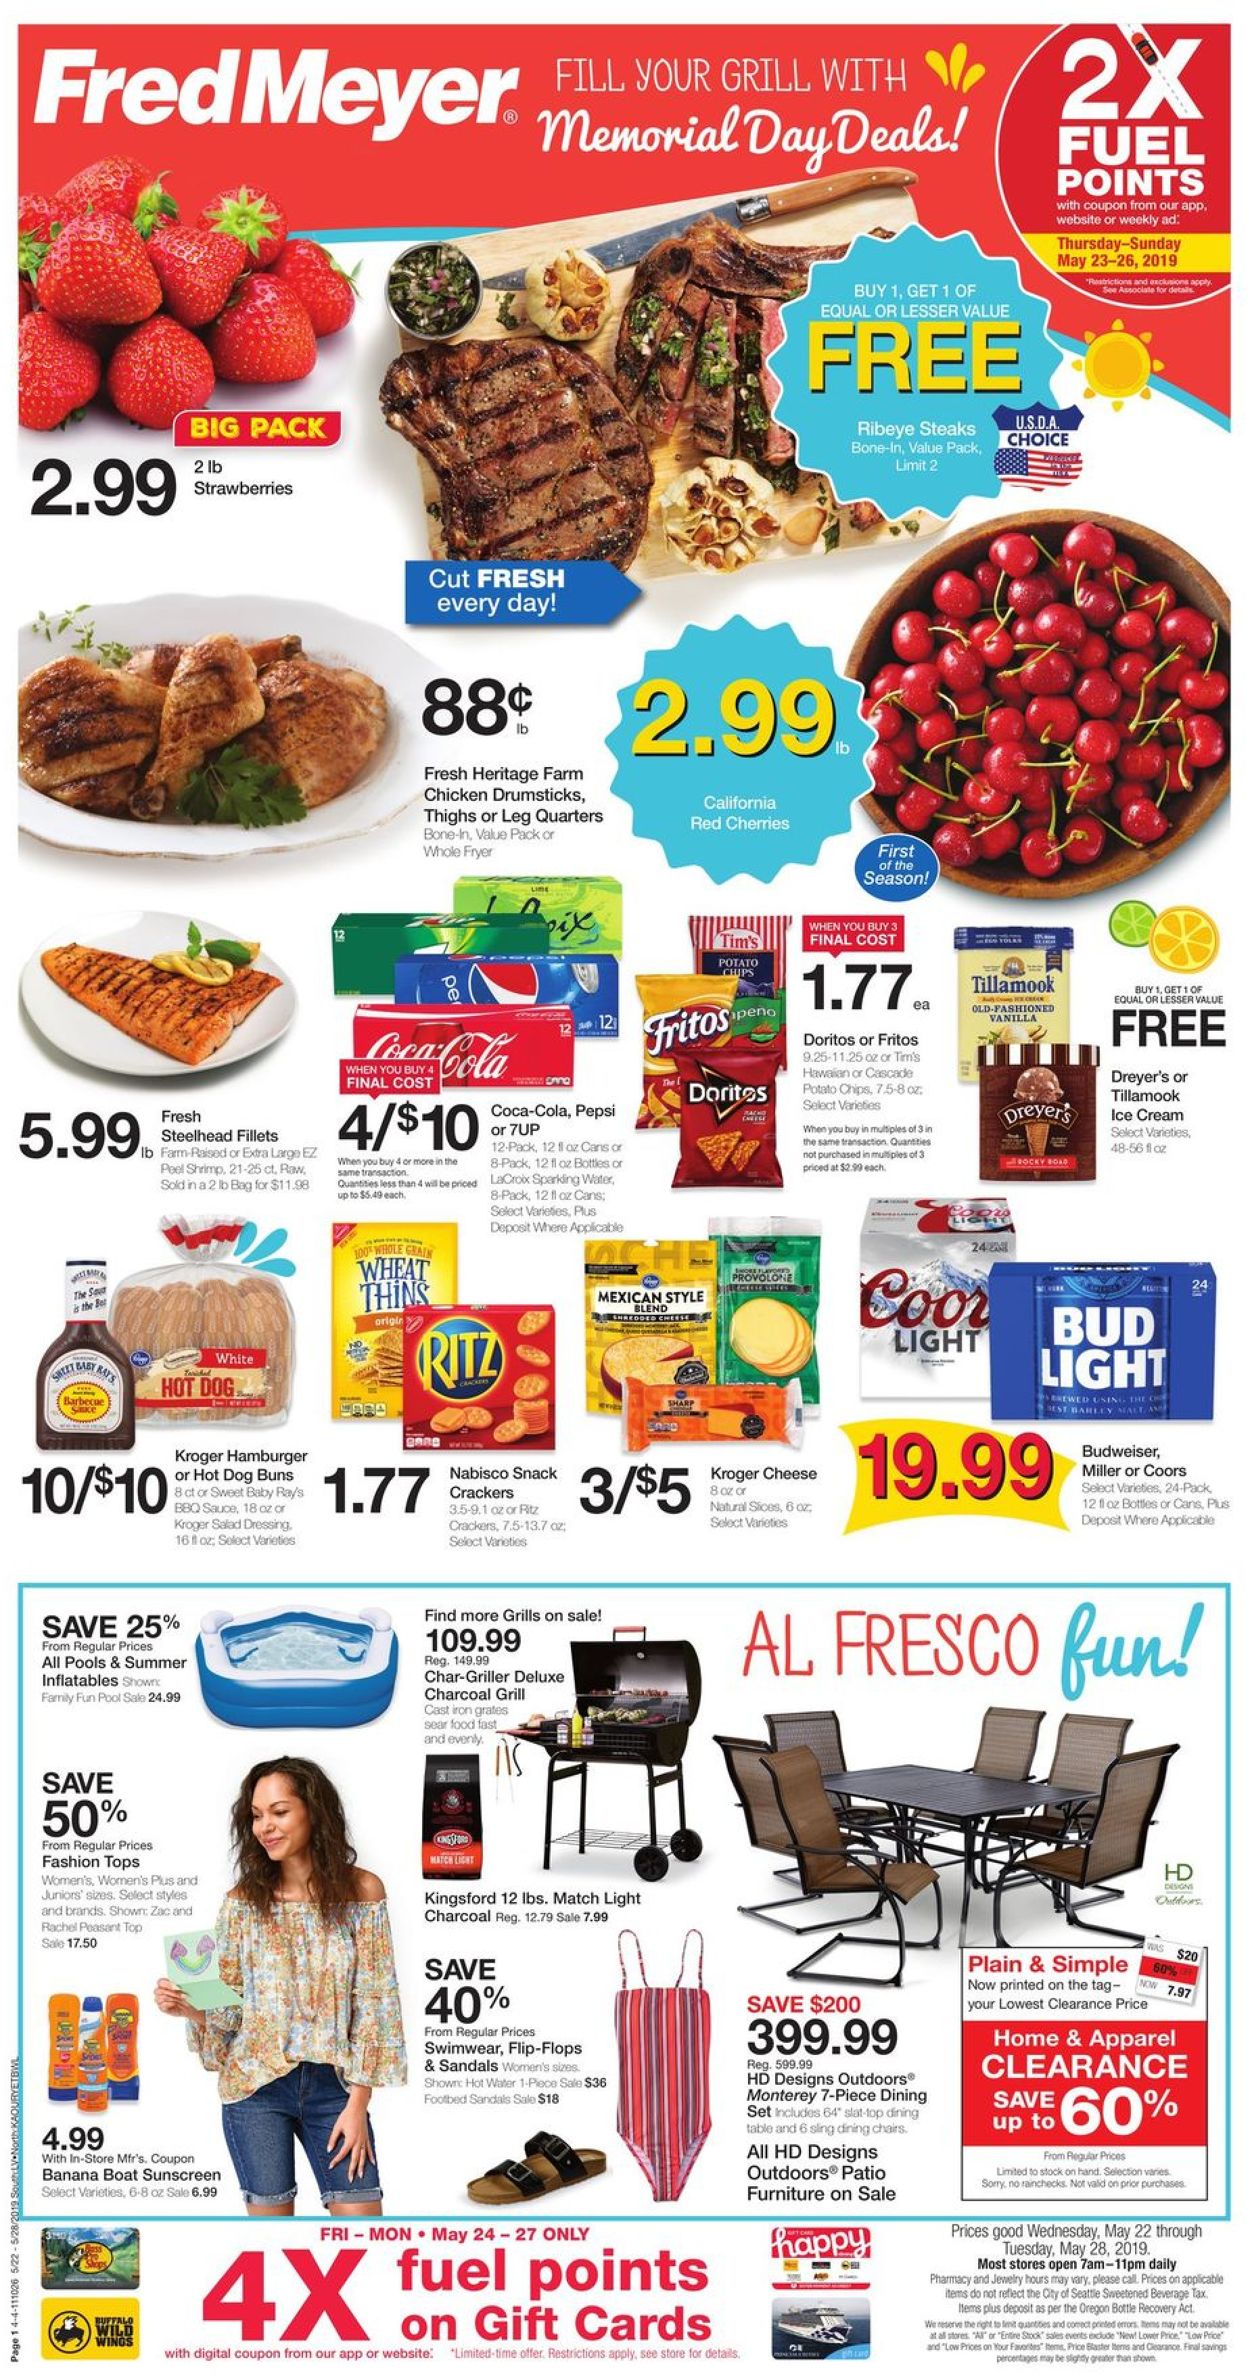 Fred Meyer Current weekly ad 05/22 - 05/28/2019 - frequent-ads.com